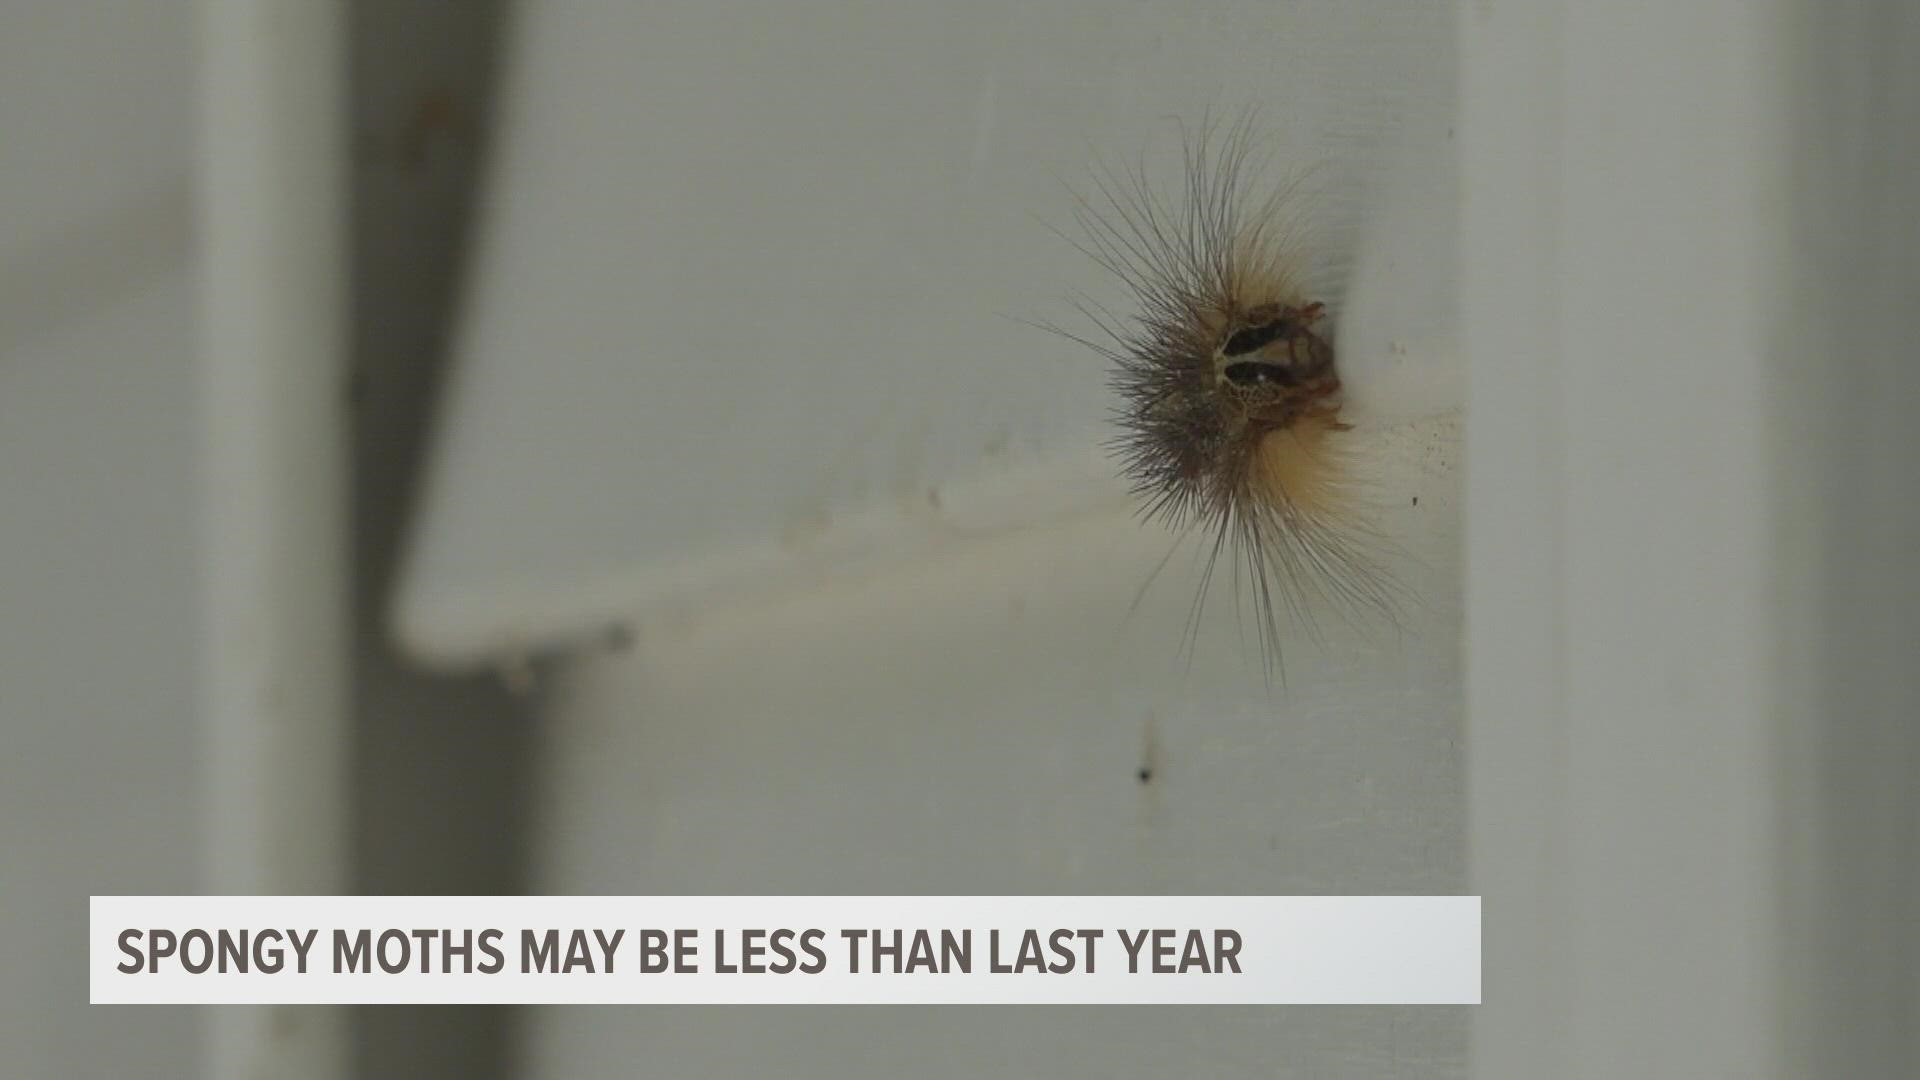 In 2021, we saw an outbreak of spongy moths, formerly called gypsy moths. Populations in 2022 declined in northern lower Michigan, the DNR says.